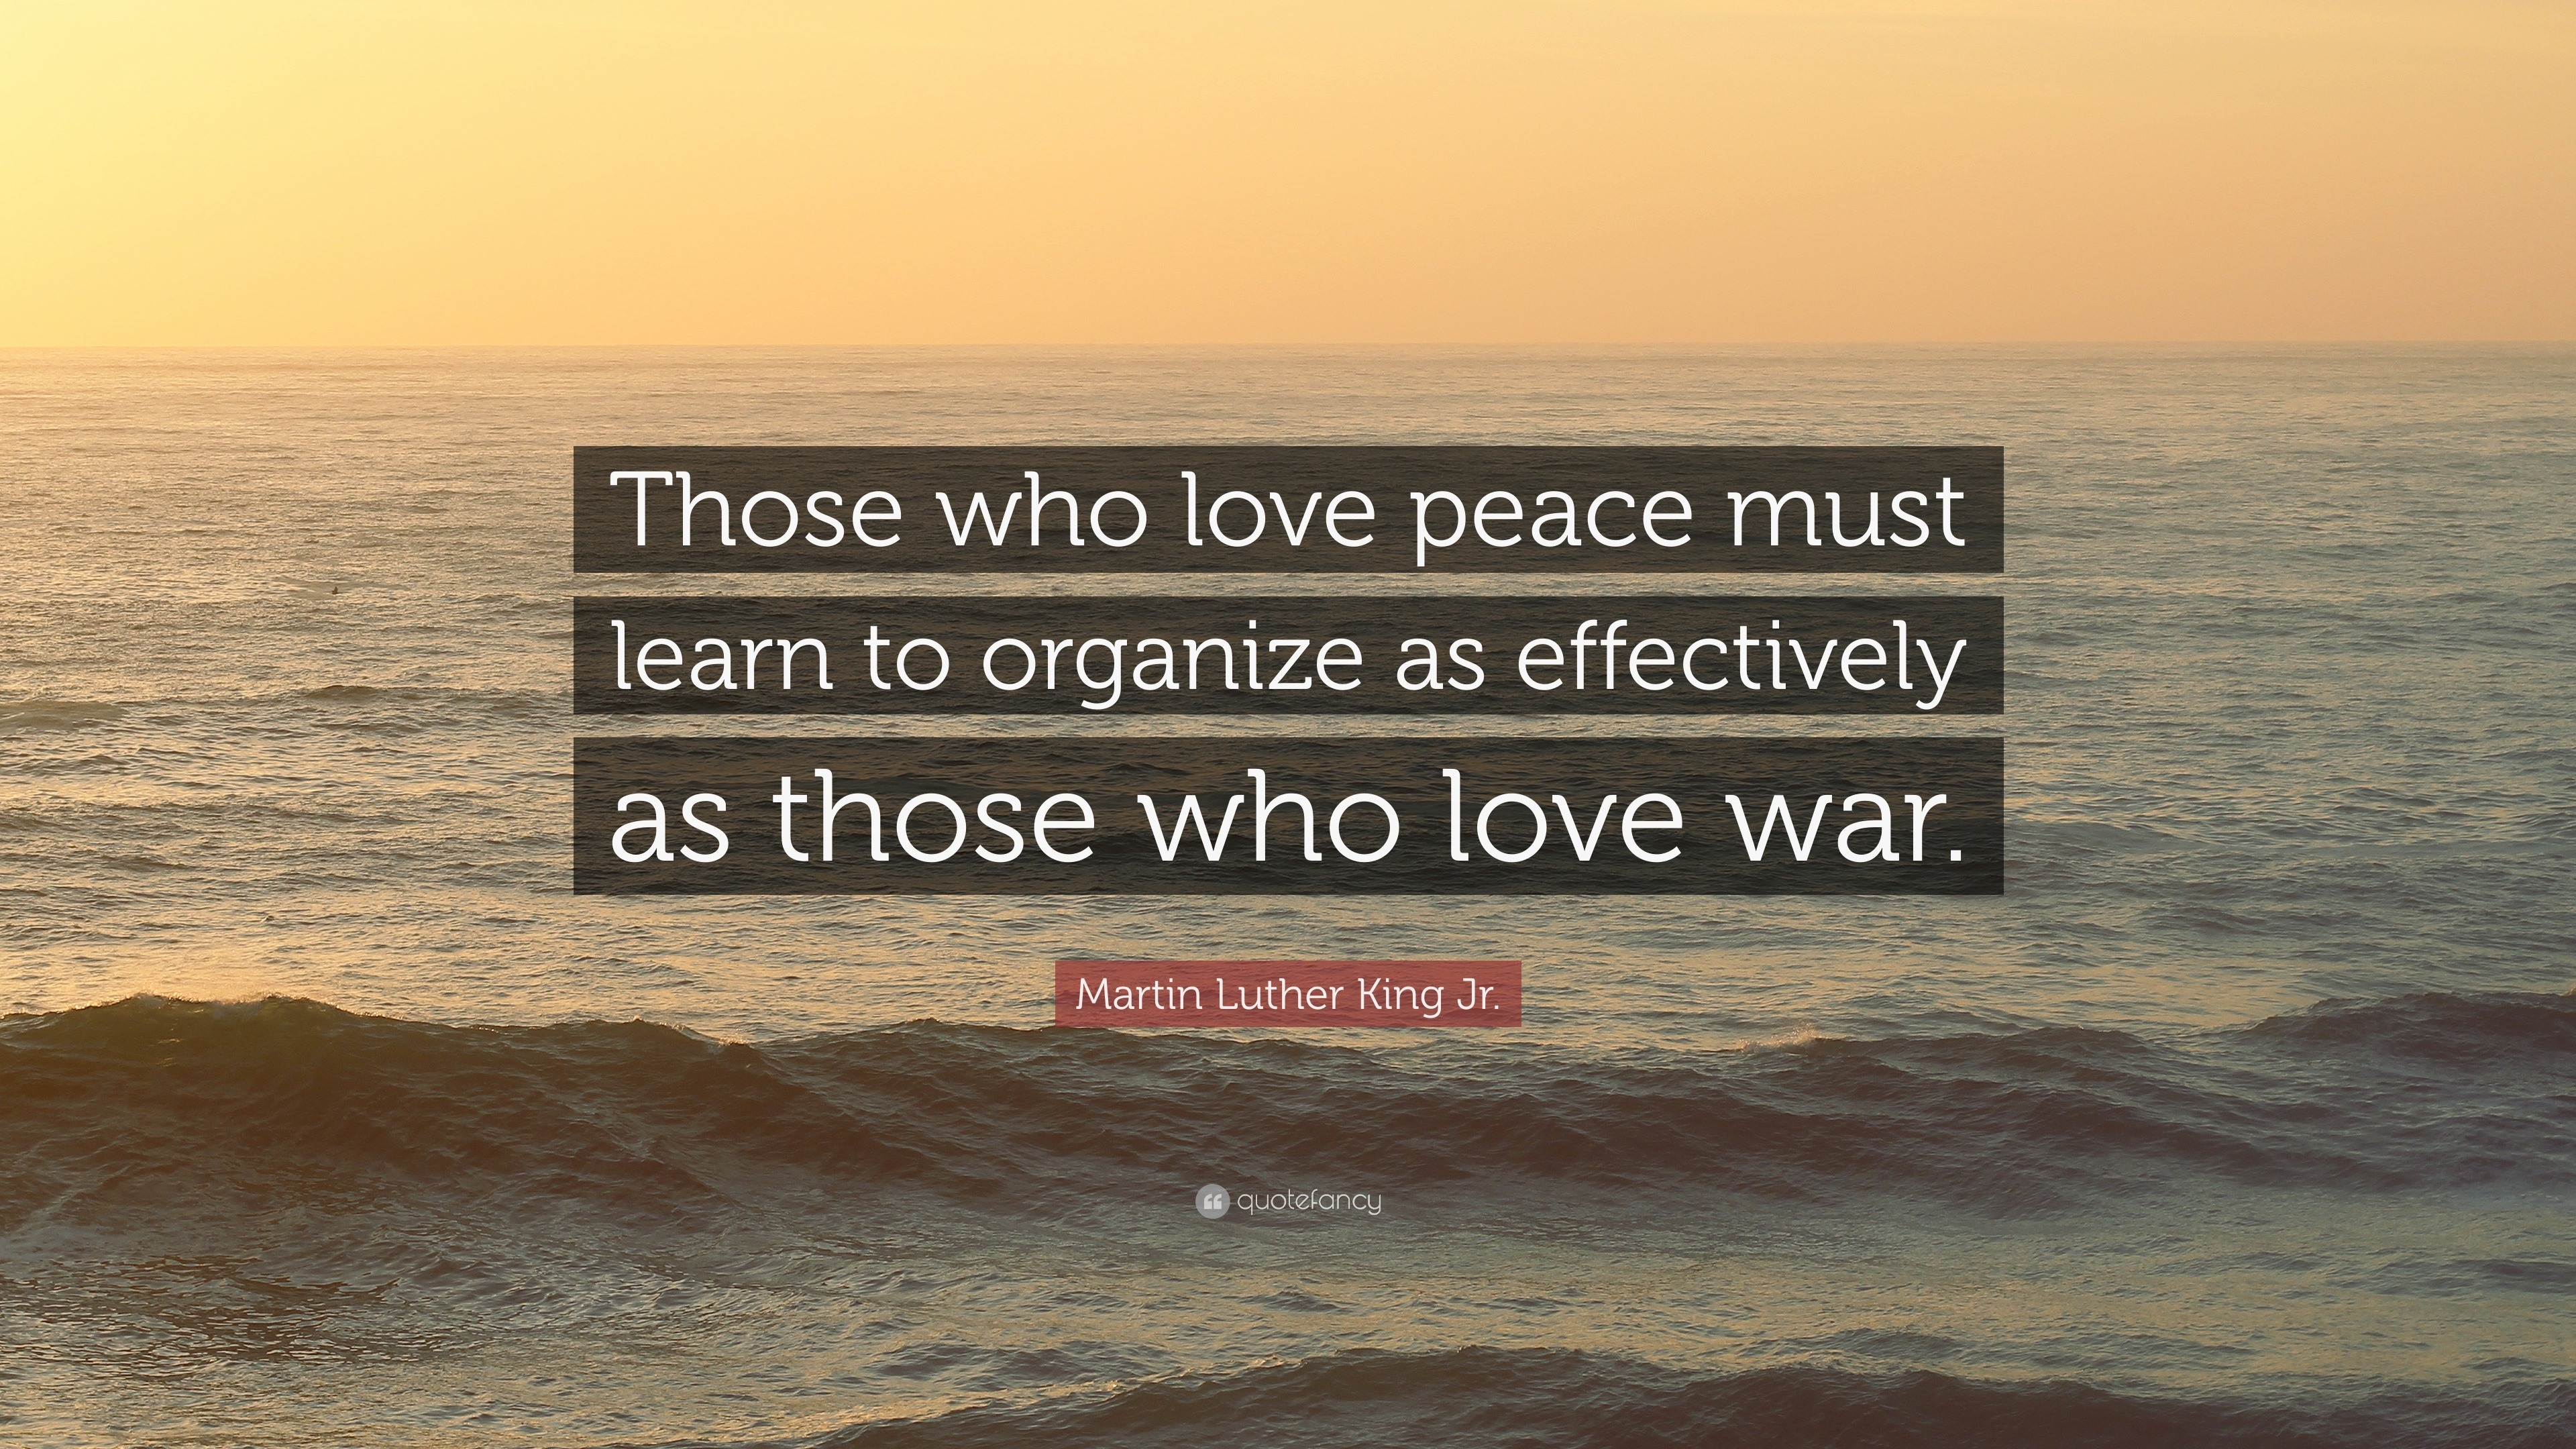 Martin Luther King Jr. Quote: “Those who love peace must learn to